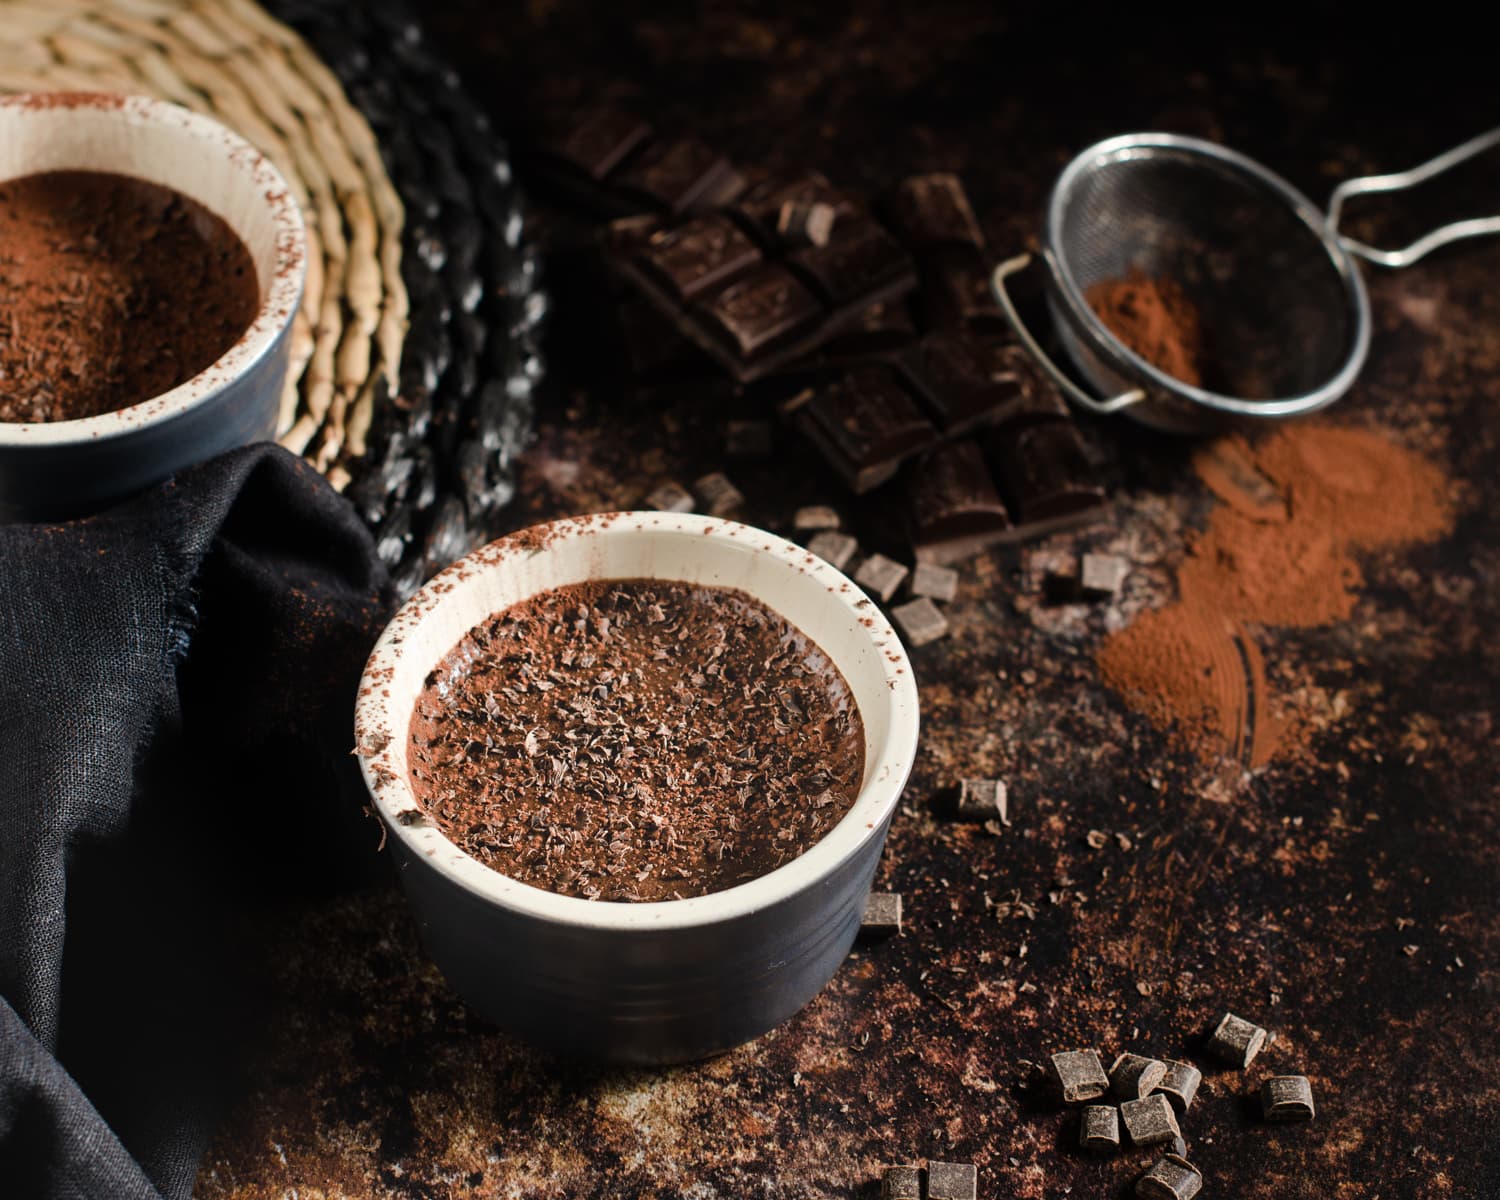 A pot of rich chocolate mousse, topped with chocolate shavings , lots of chocolate pieces scattered around, an old sieve with cocoa powder dusted around on a dark mottled brown marble backdrop.